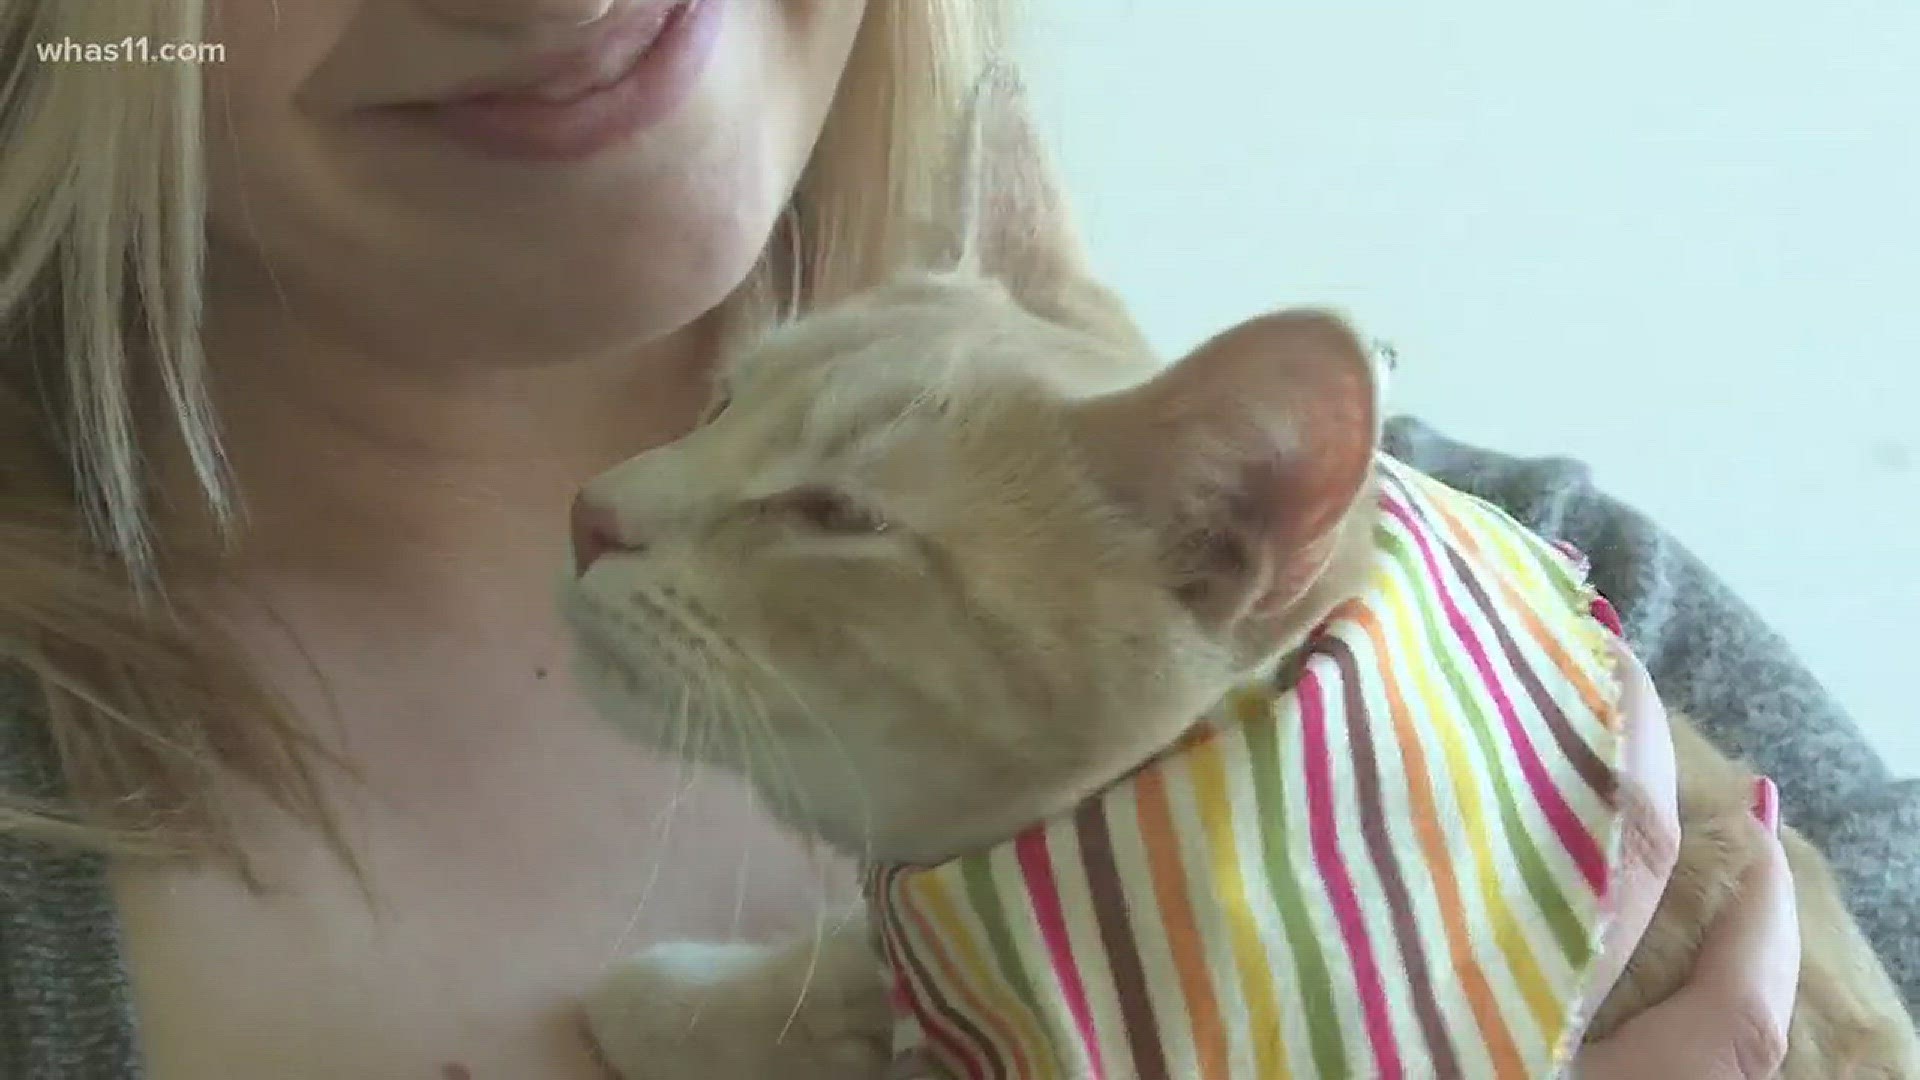 Sneak peek at city's first-ever cat cafe